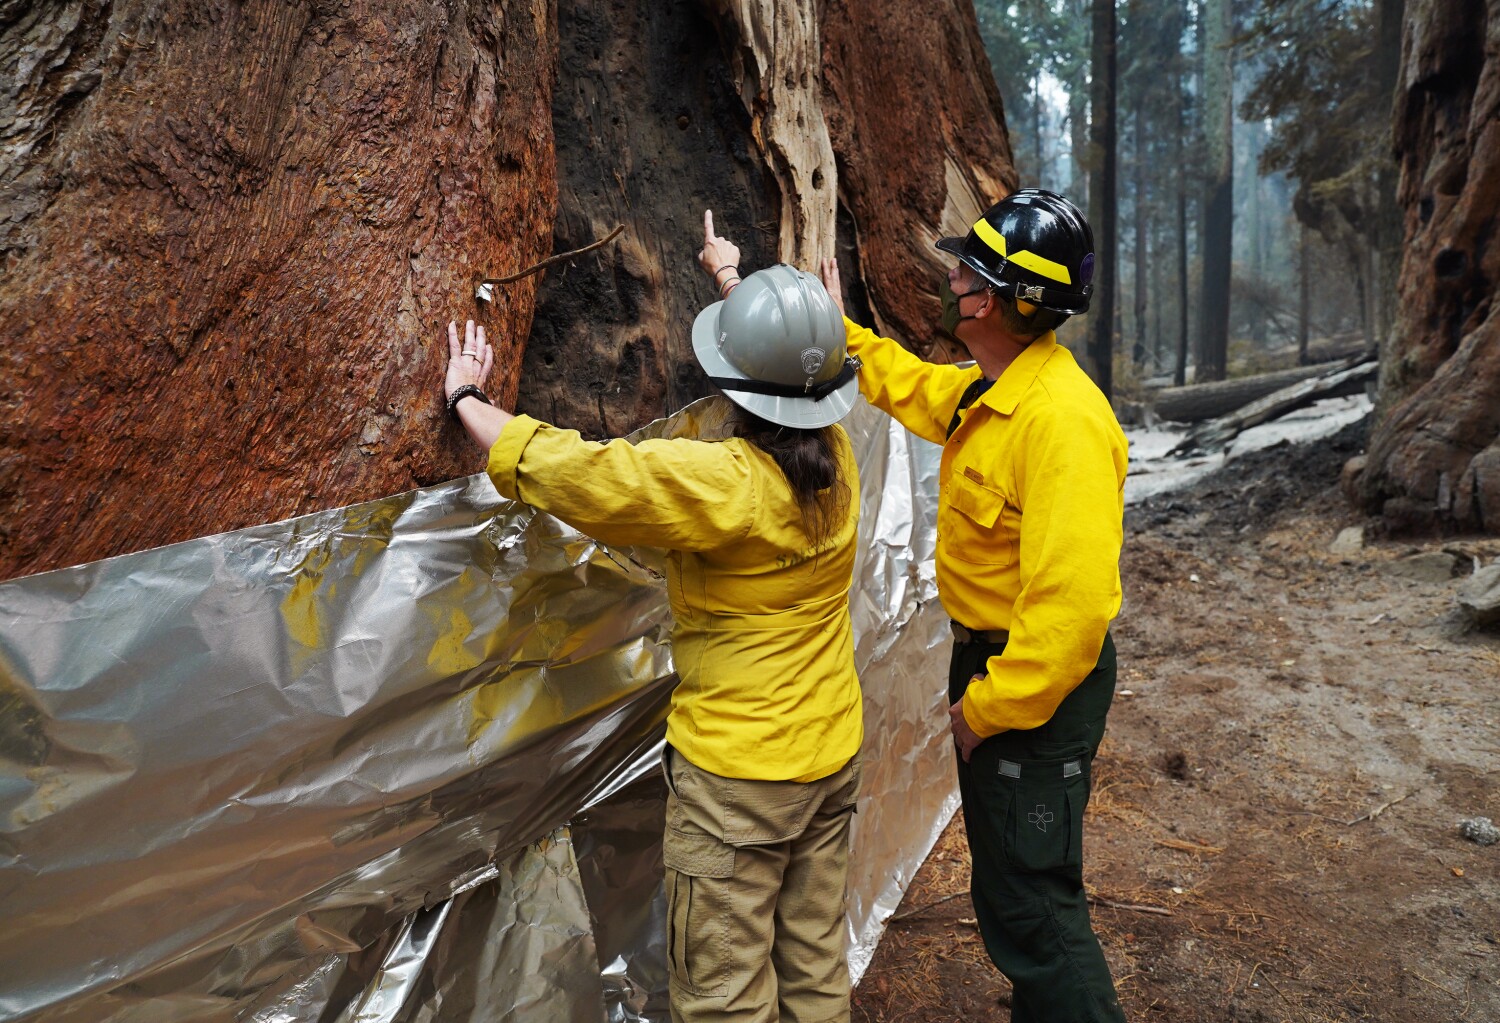 Hundreds of giant sequoias may have burned to death in KNP Complex, Windy fires